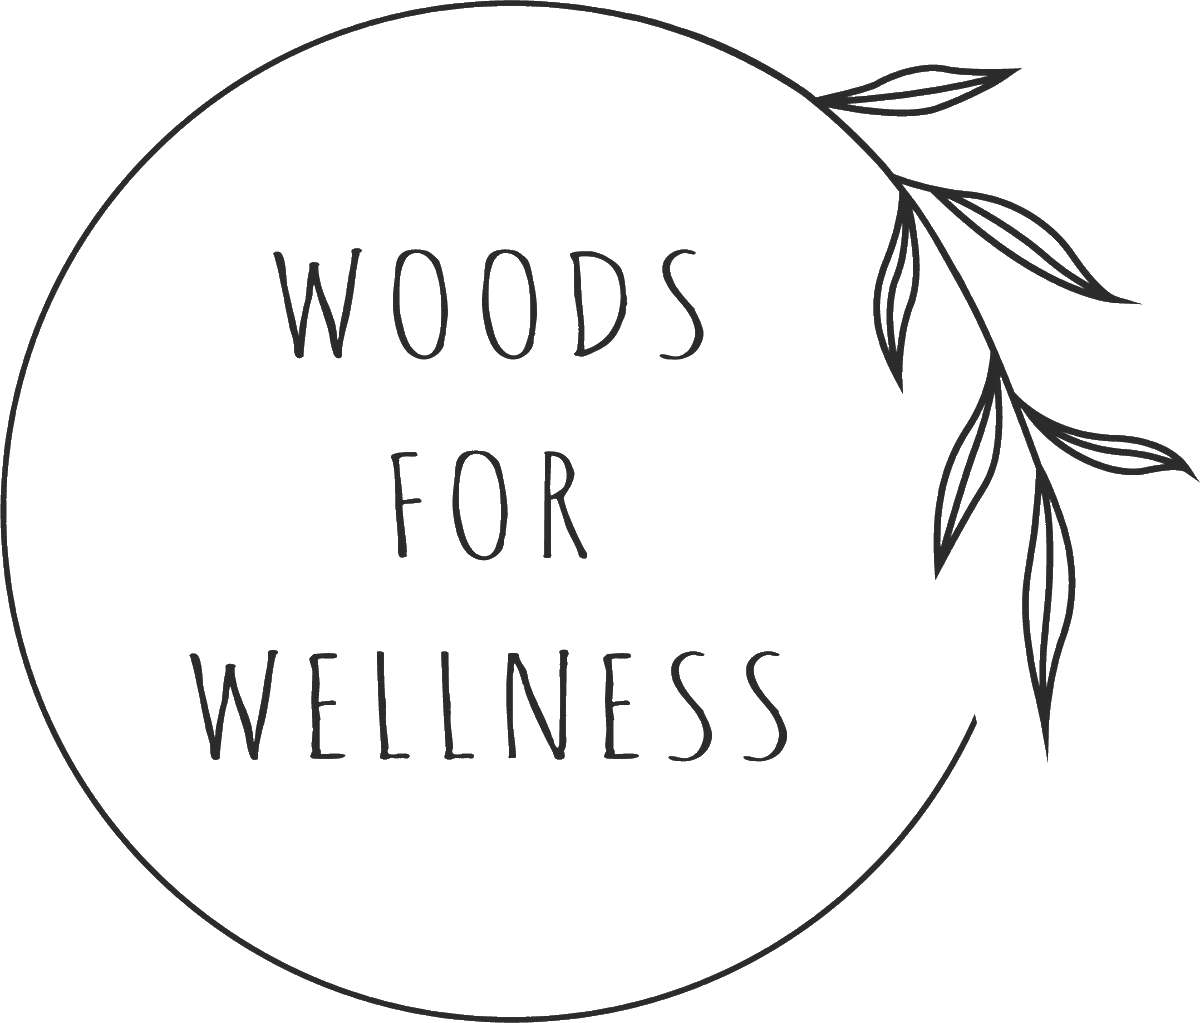 @TheWoodsPresent have set up a new community project called 'Woods for Wellness'. However we need your input to assist us shape this vision and service. Please spare 5 mins to answer some important questions to create your wellness programme! forms.gle/WoUW7CsDpEJaa7… Thank you!